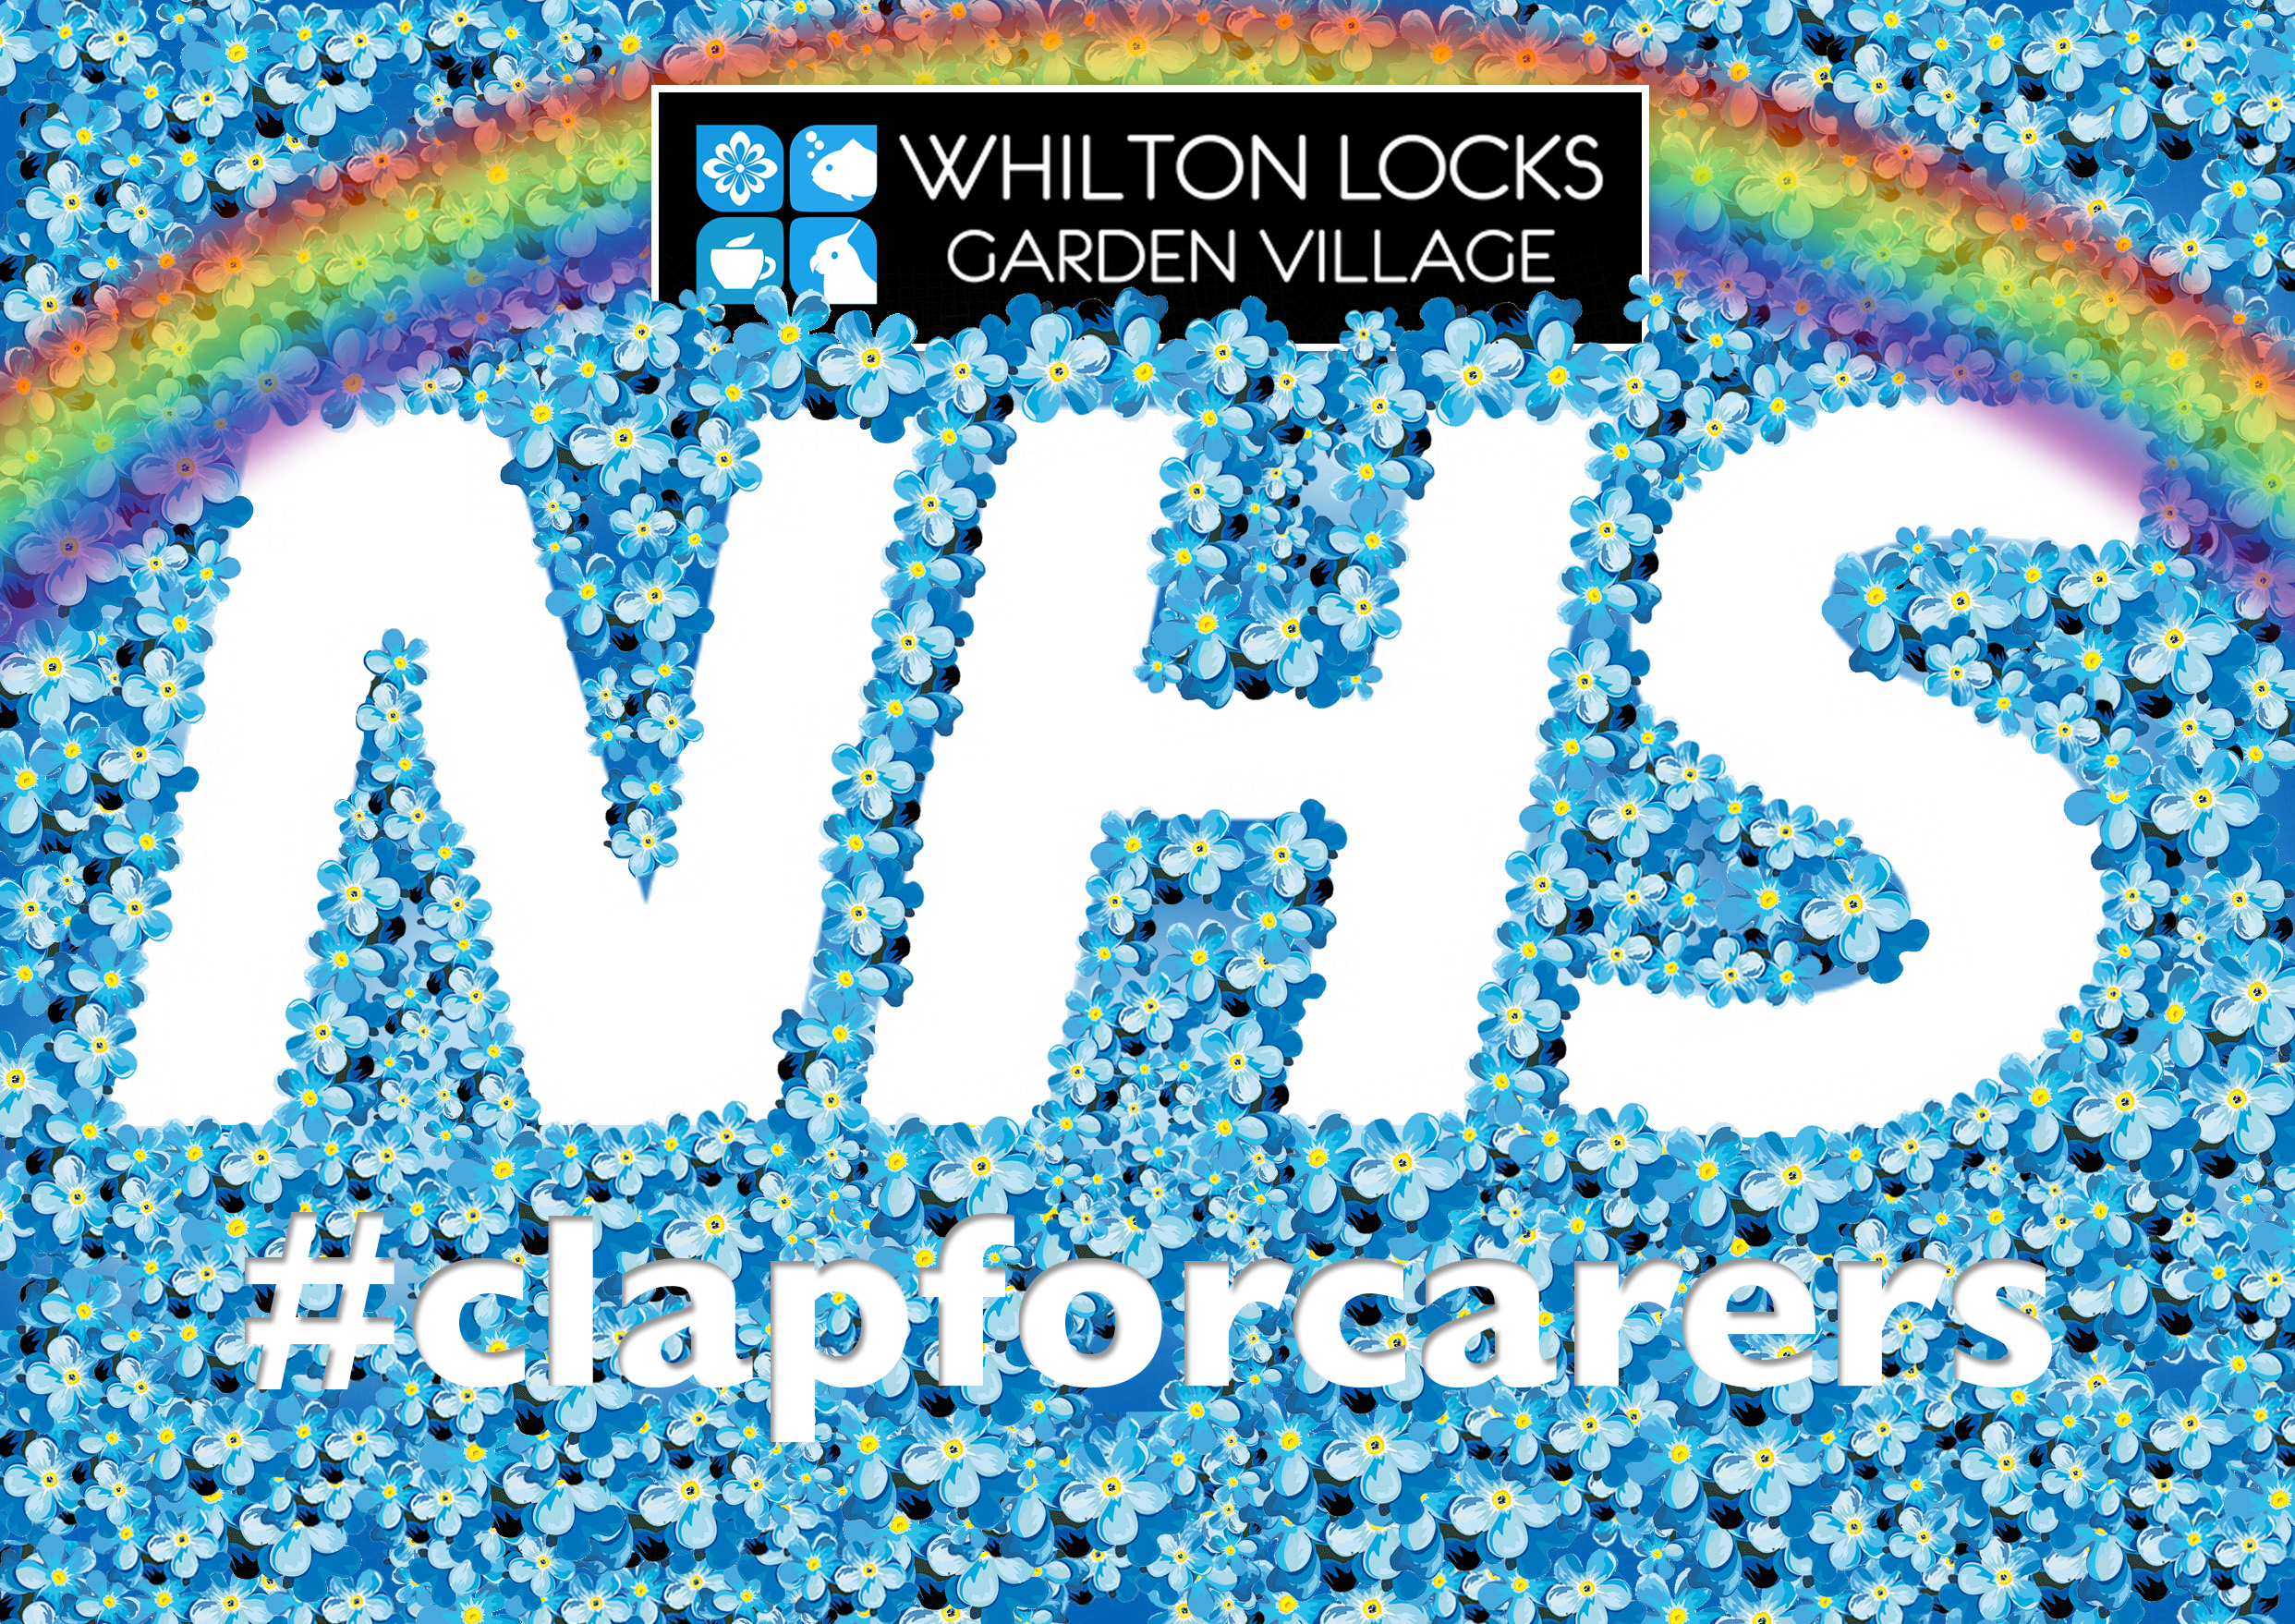 NHS Clap for Carers